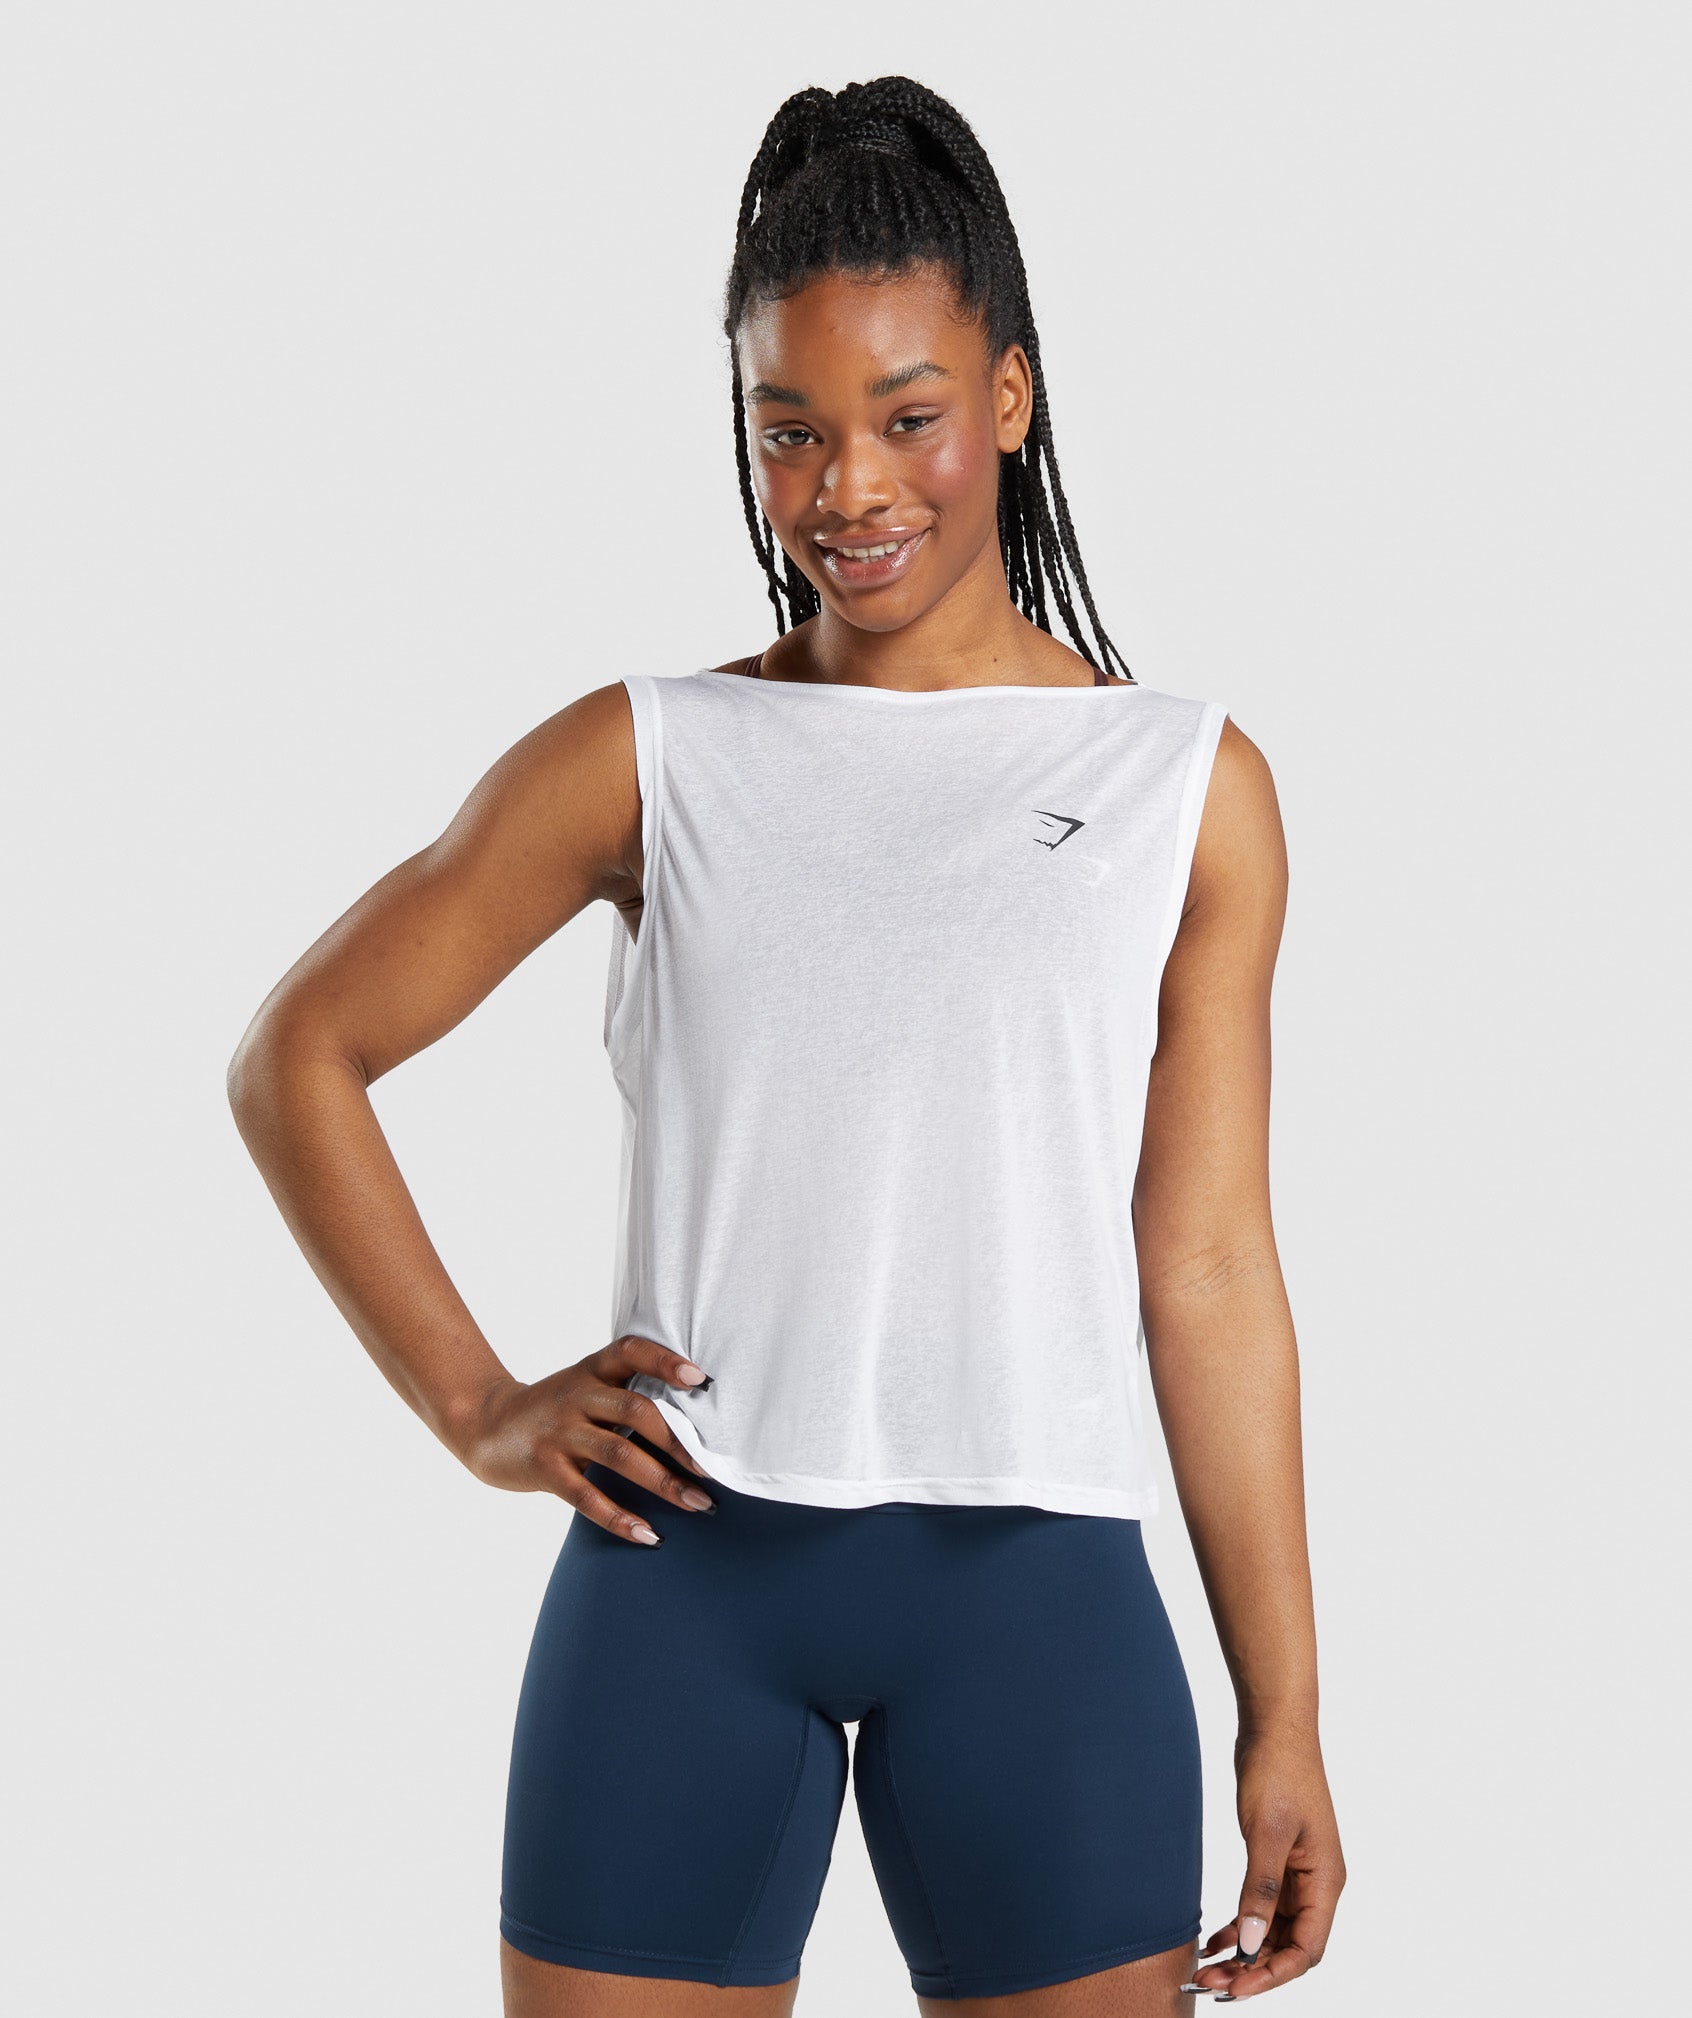 Women's Workout Tanks – Gym Tank tops from Gymshark